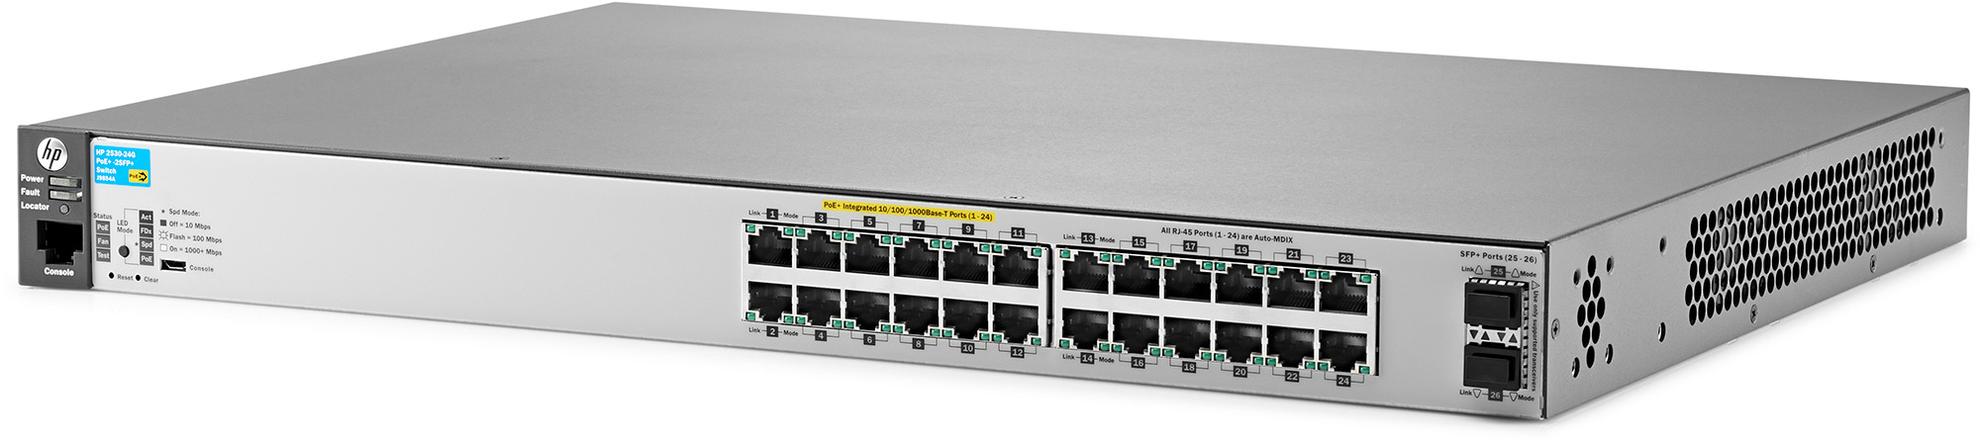 HP 2530 24G MANAGED SWITCH